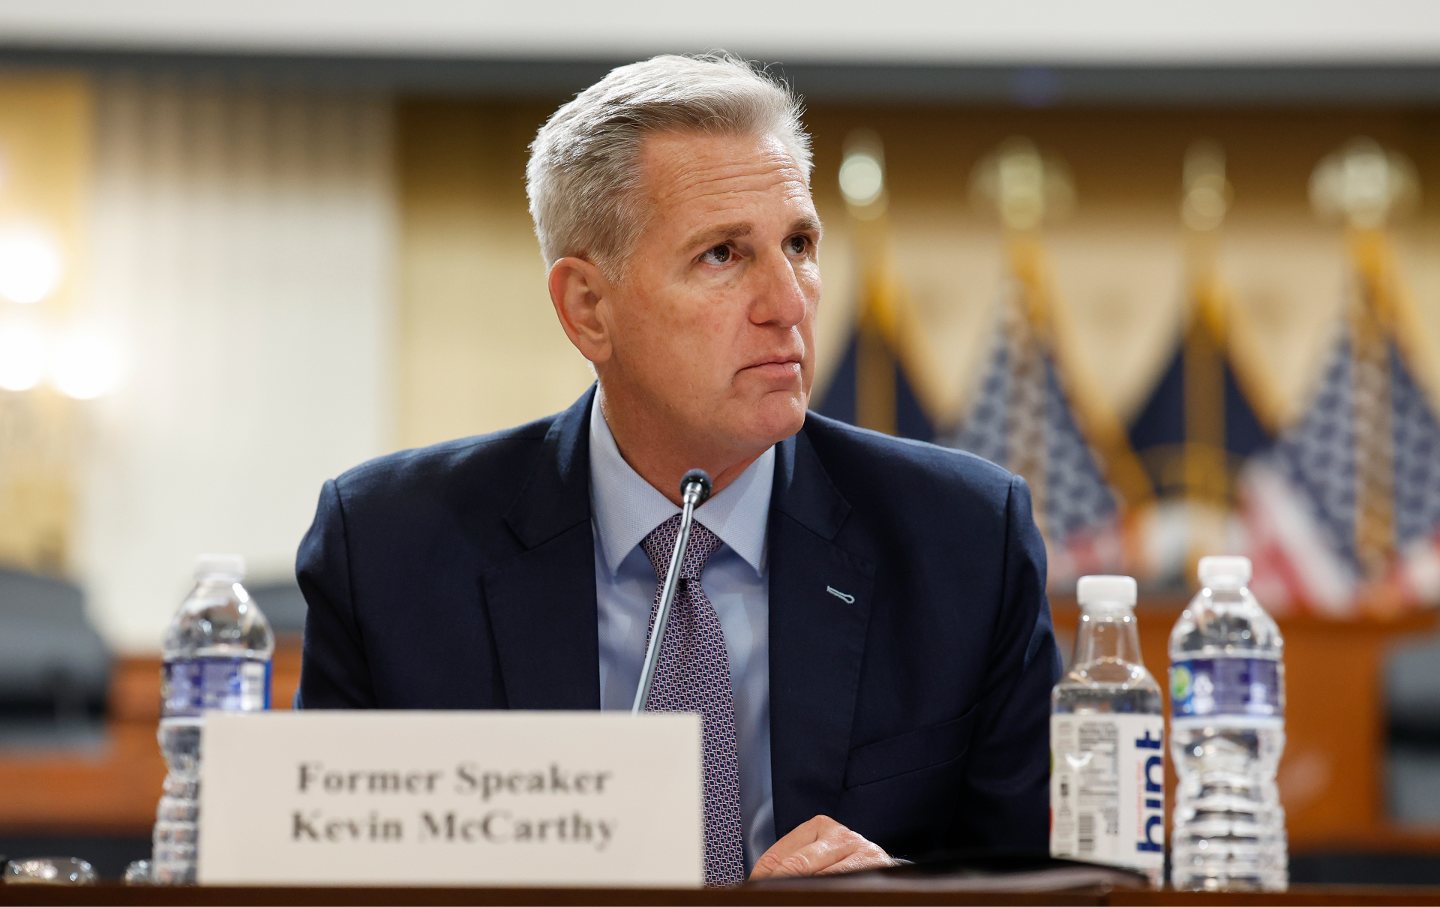 Former speaker of the House Representative Kevin McCarthy (R-Calif.) listens during a press conference with members of the House Select Committee on the Chinese Communist Party at the Cannon House Office Building on November 15, 2023.